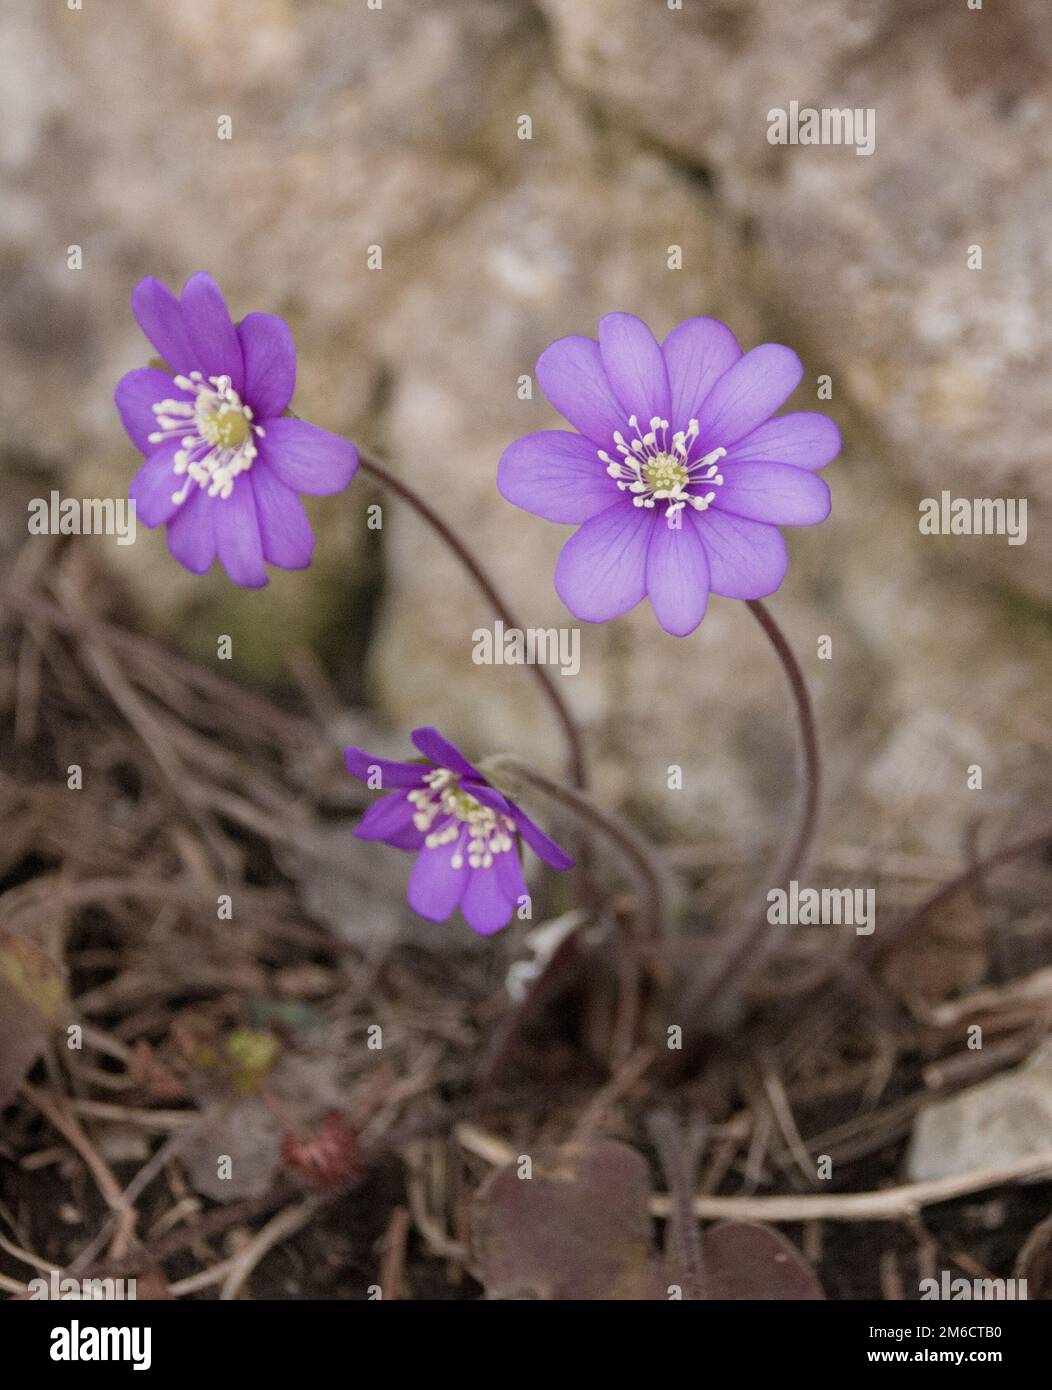 Blue violet anemone flower growing in a stone wall Stock Photo